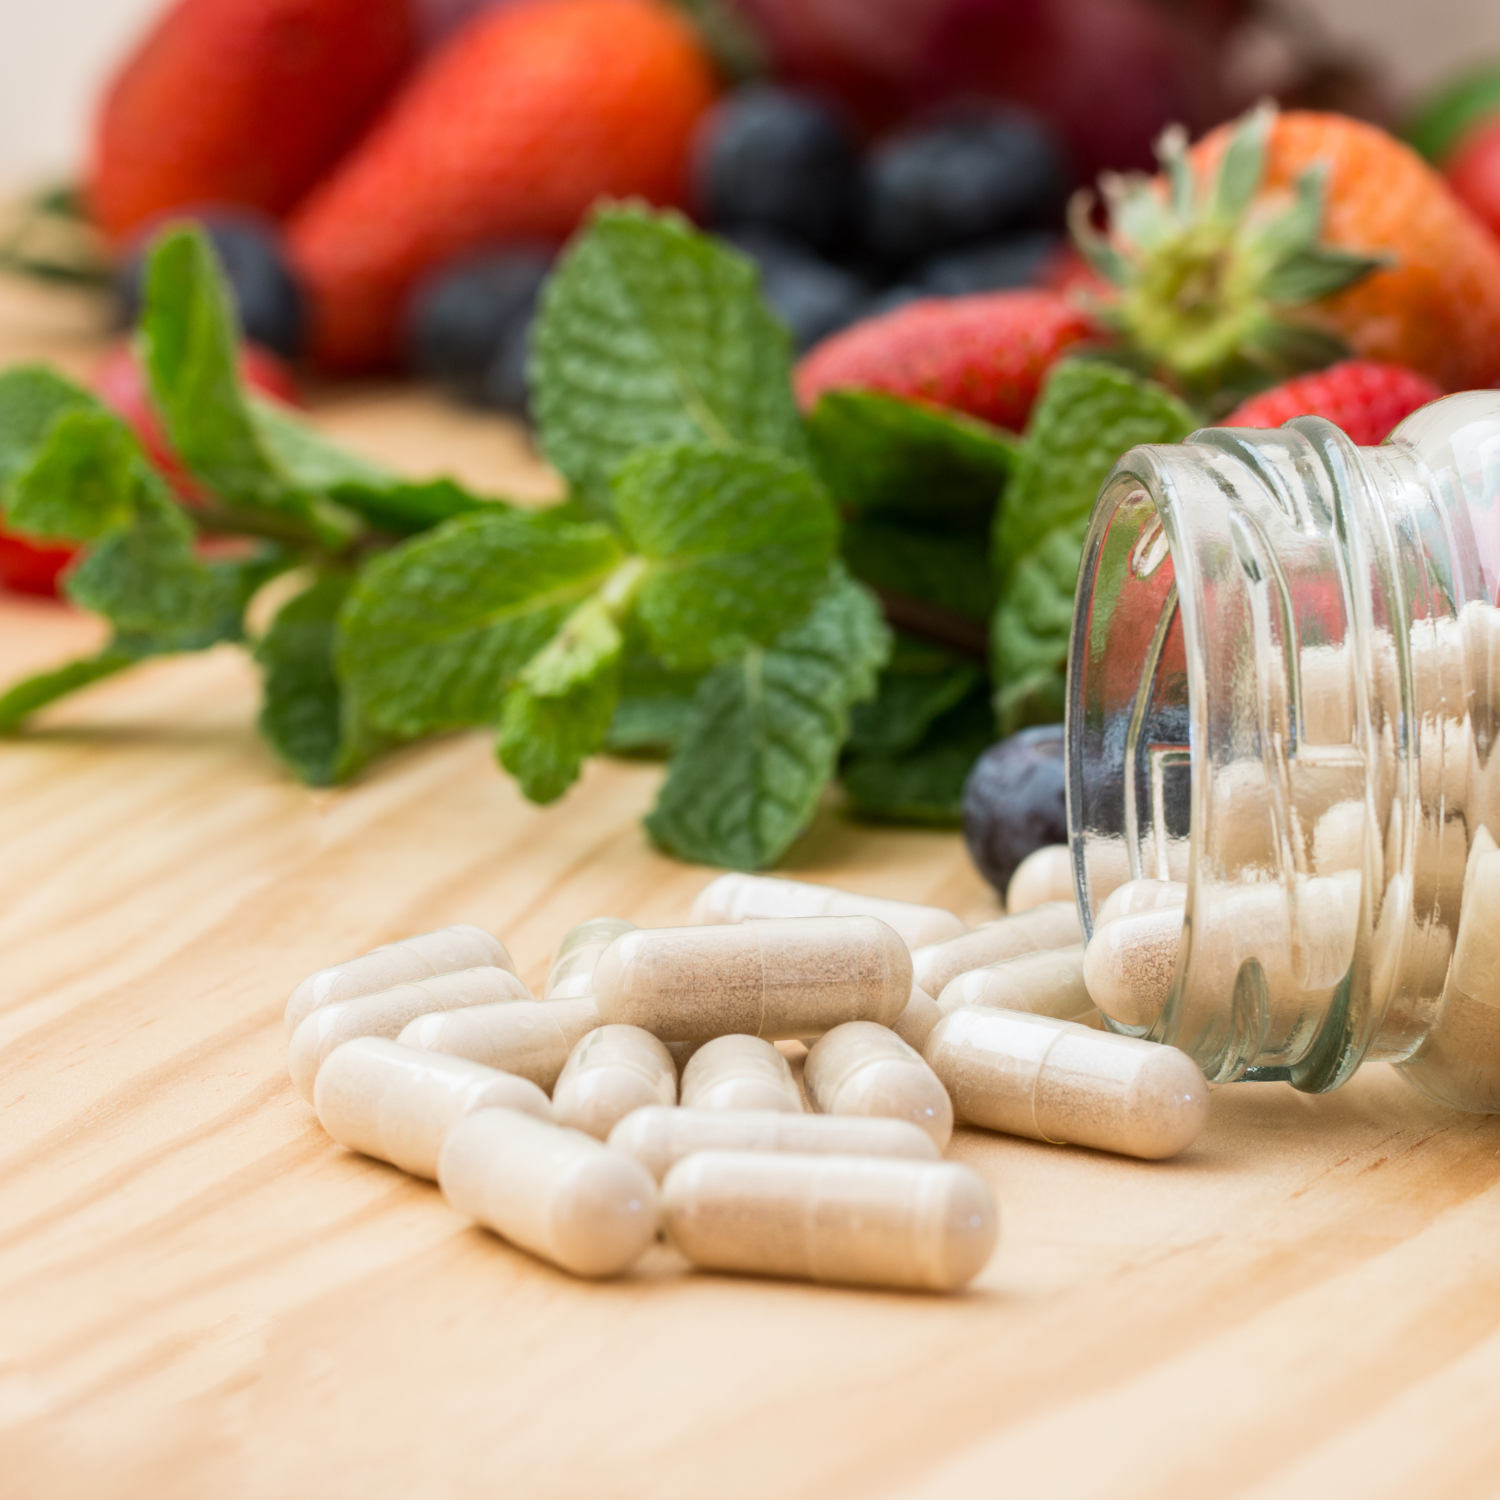 Comparison of healthy plants and vitamin supplements: a plate of fresh vegetables on one side and a bottle of pills on the other, with a question mark in between.